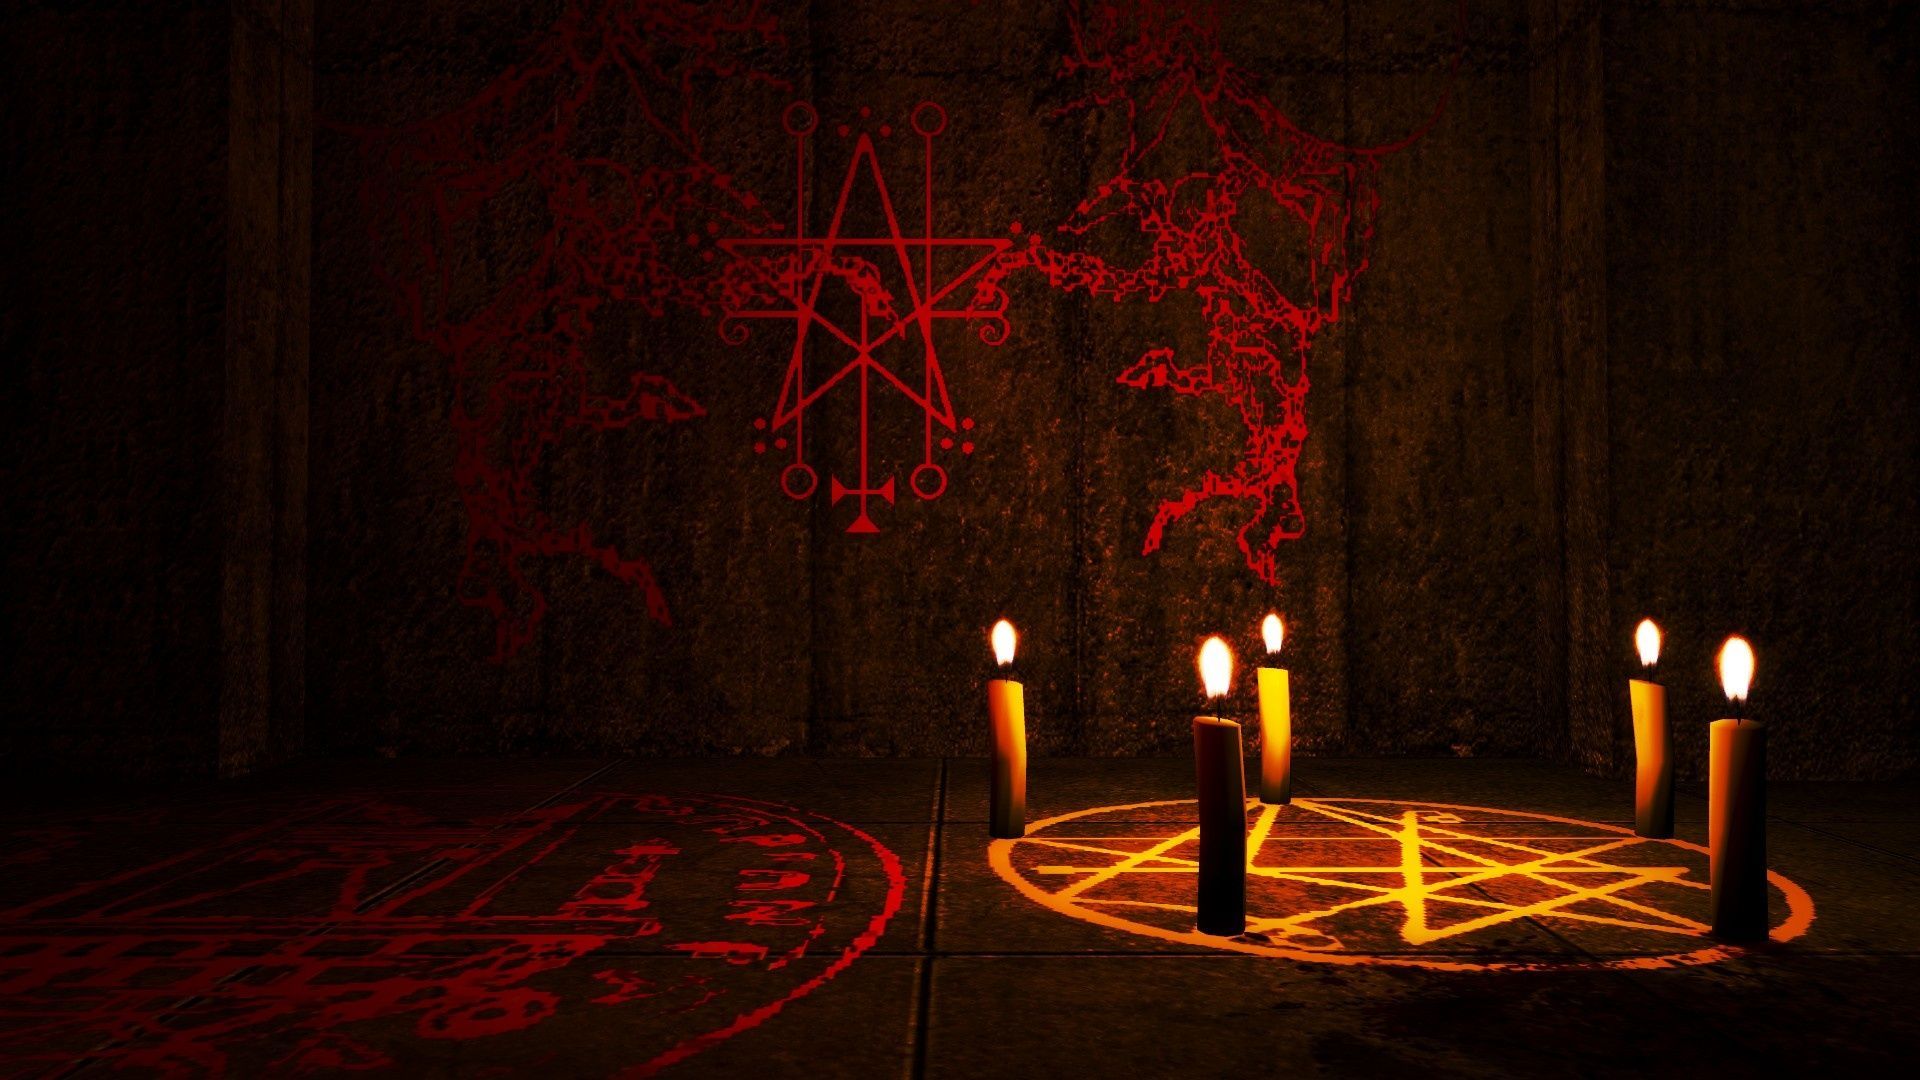 Free download Cult of Cthulhu Occult Windows 8 Wallpaper Windows8